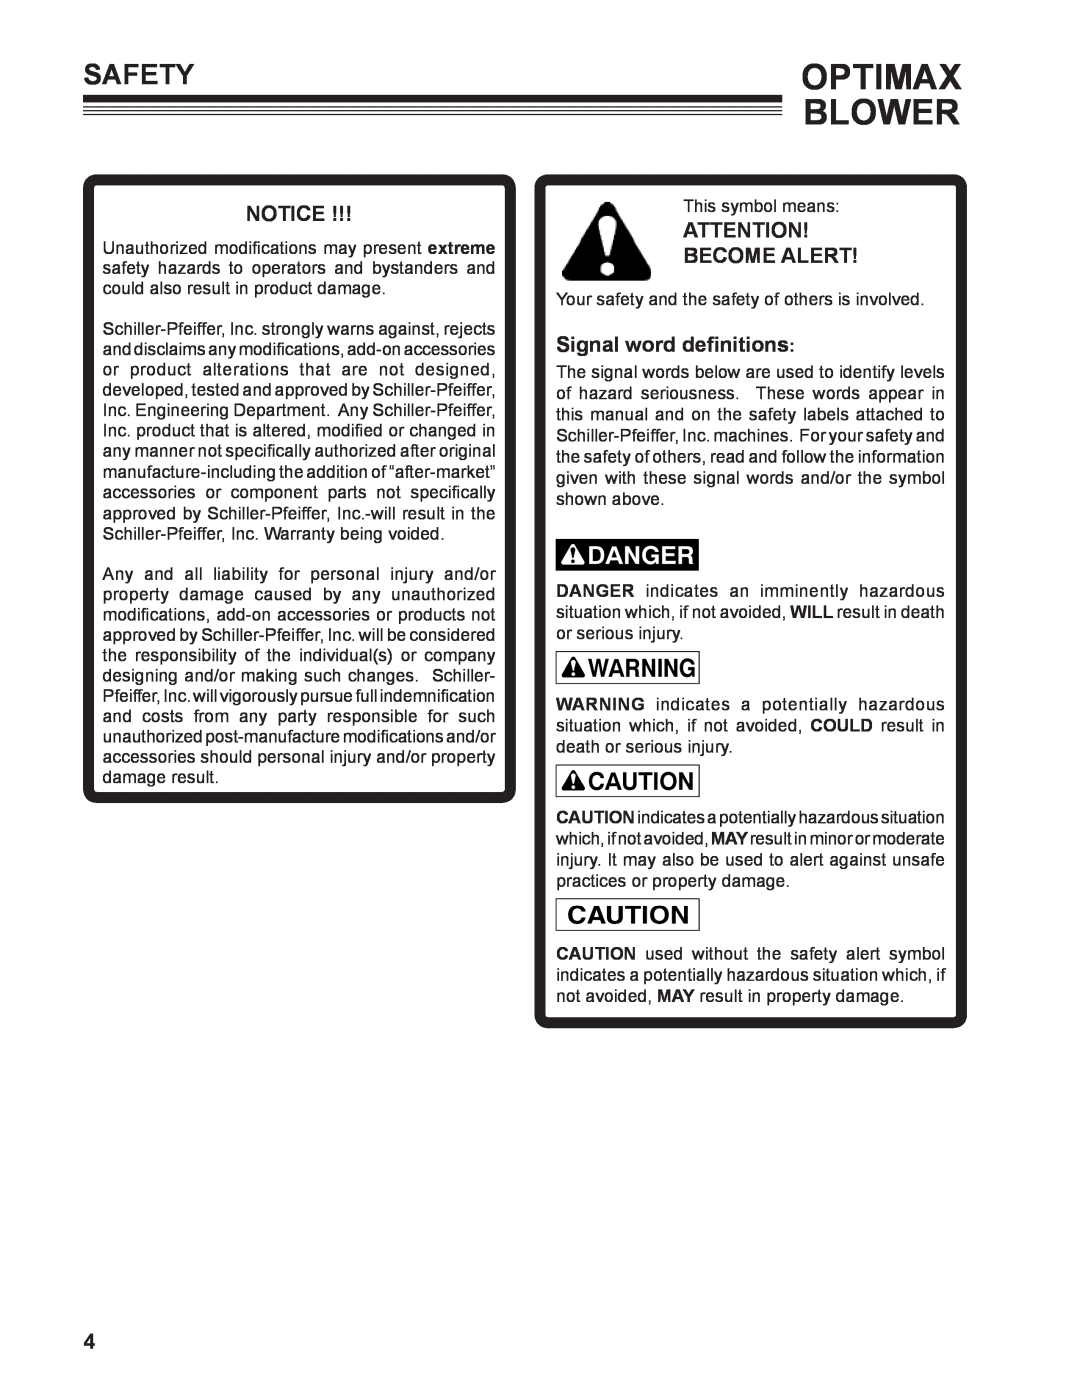 Little Wonder 9131-00-01 technical manual Safety, Become Alert, Signal word definitions, Optimax Blower 